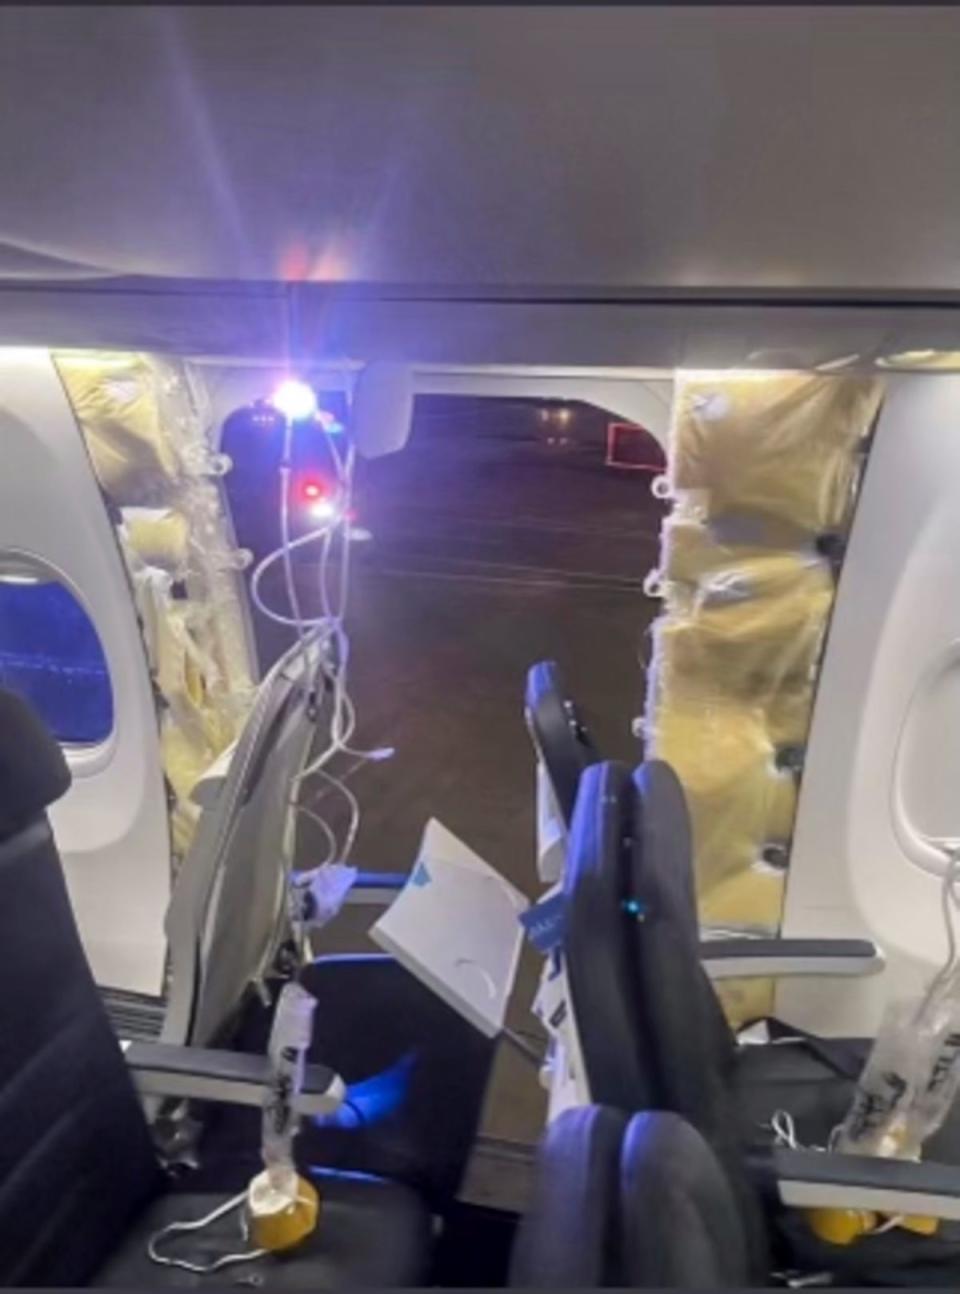 Boeing’s manufacturing process has faced scrutiny after a series of high-profile incidents, including a door plug blowing out of an Alaska Airlines flight at 16,000 feet. (AP)